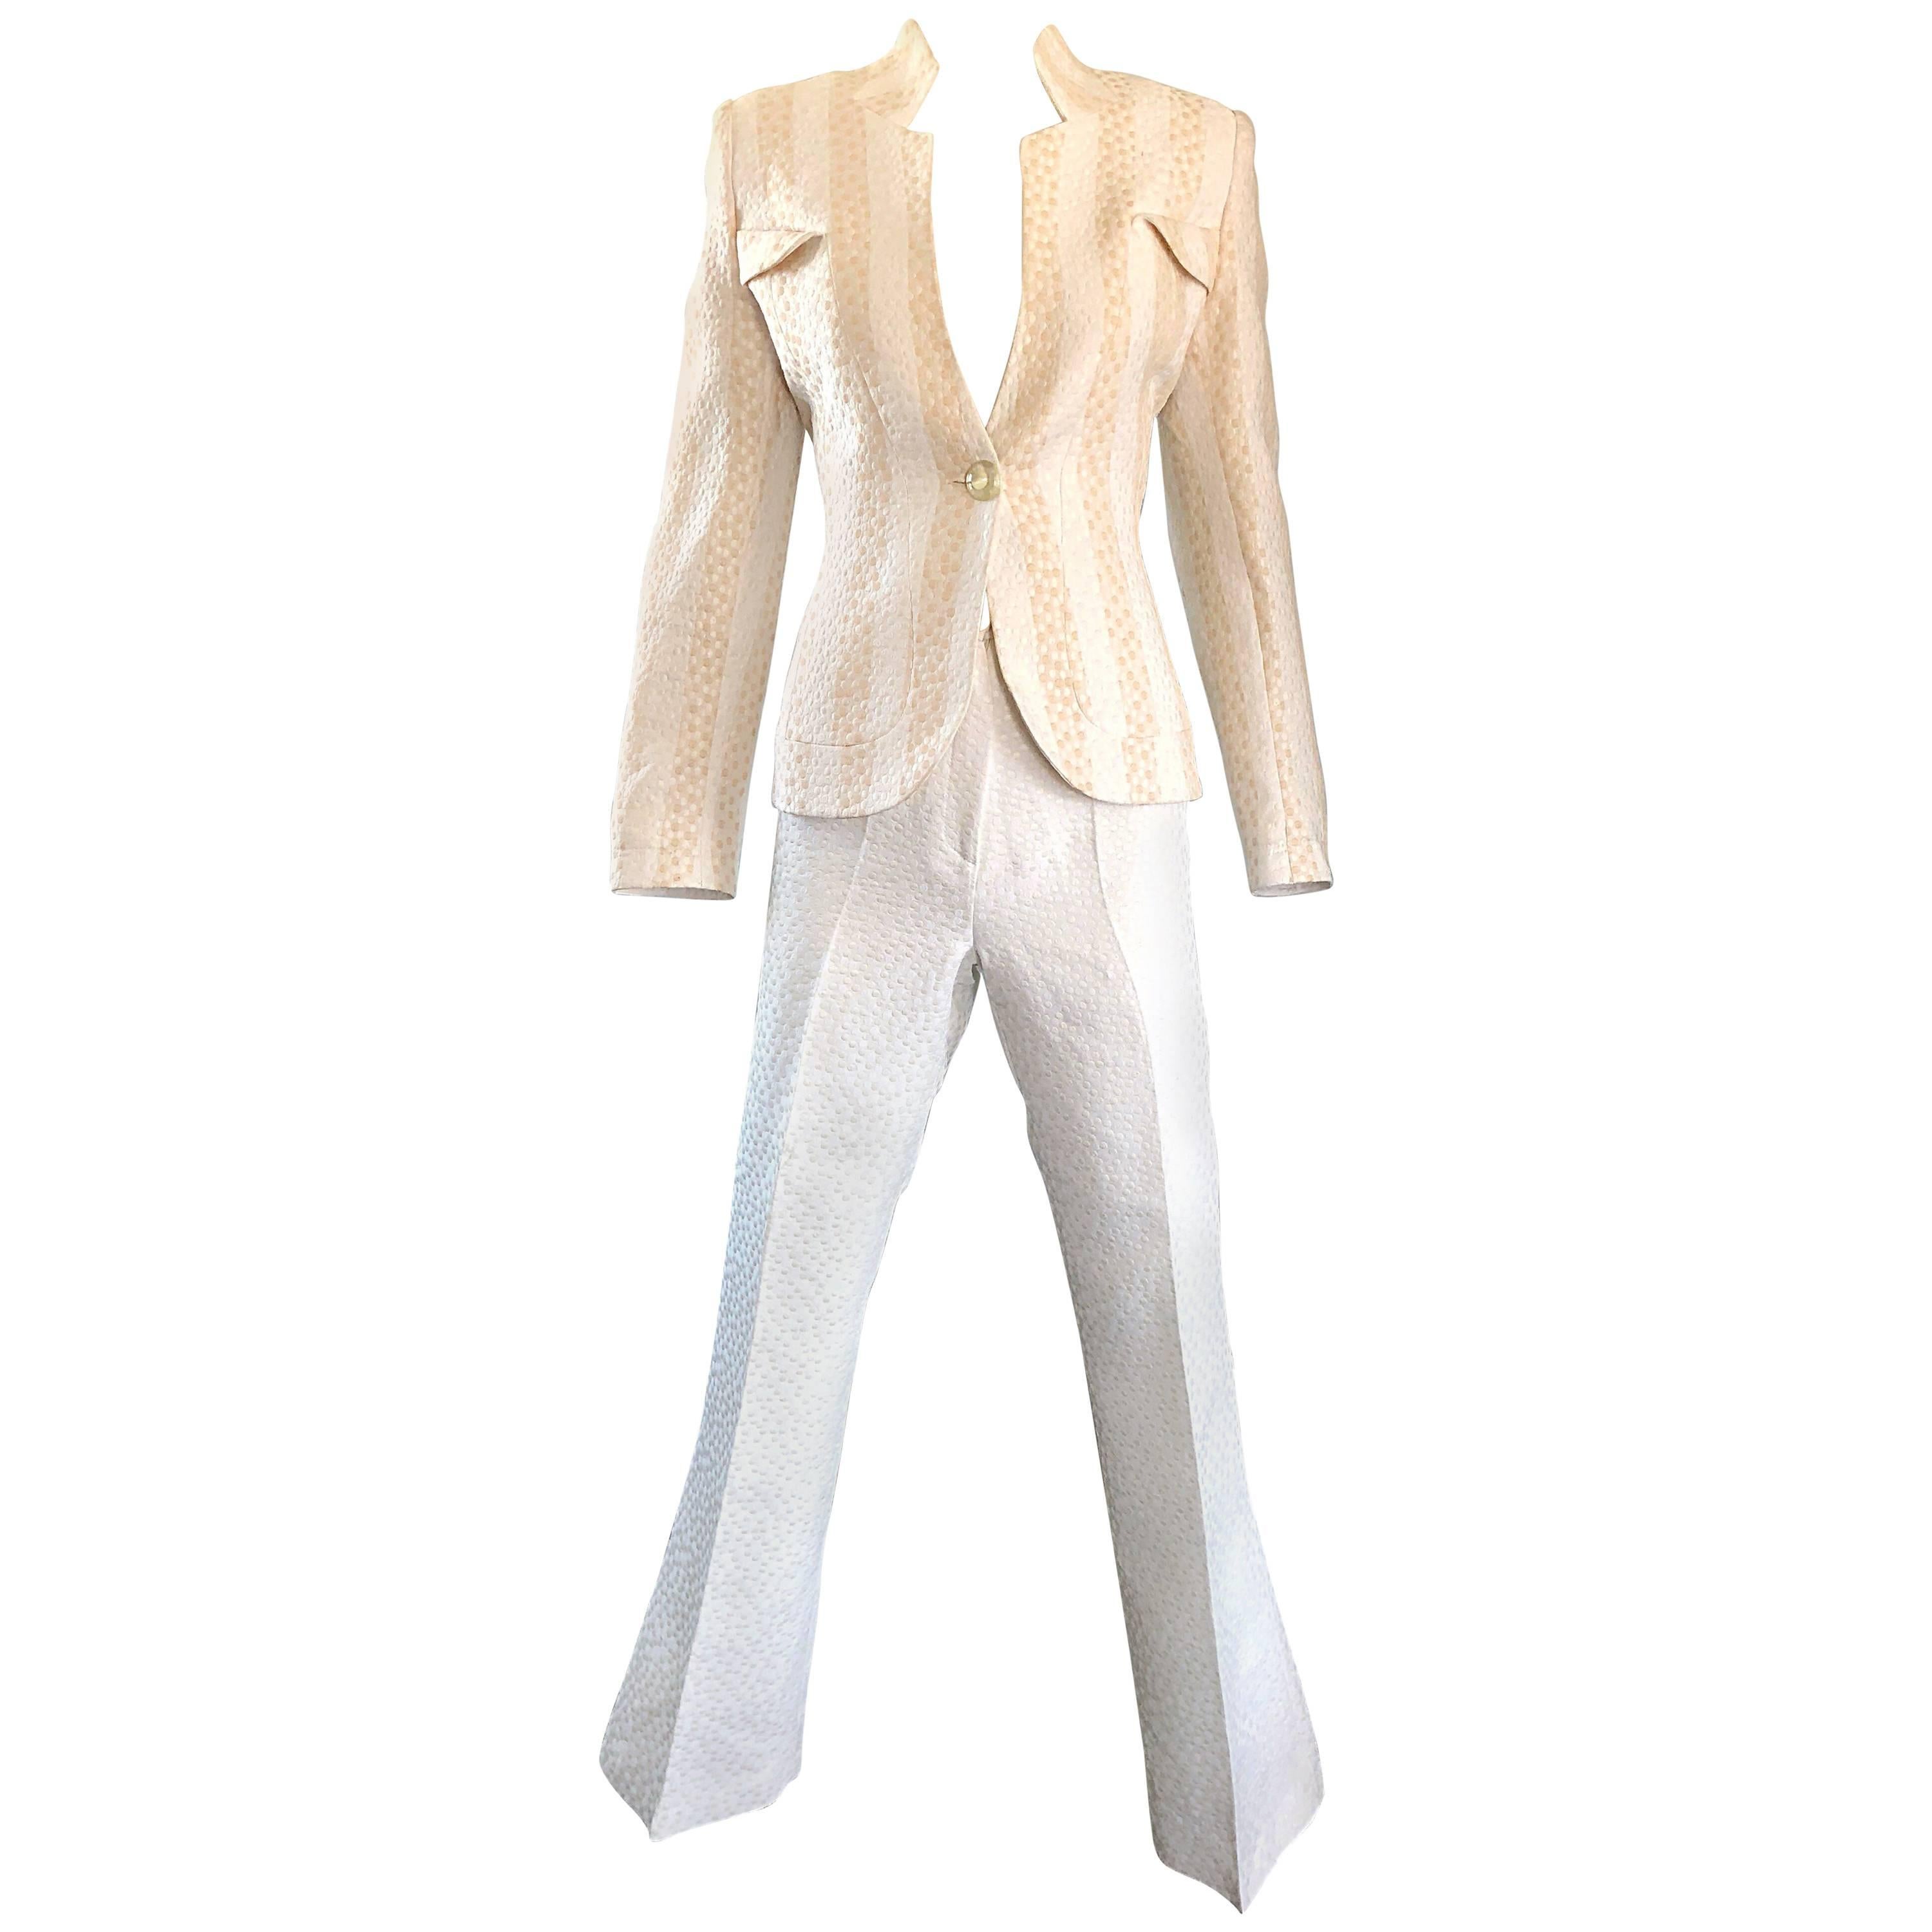 Vintage Max Nugus Couture 1990s White + Beige Polka Dot 90s Tailored Pant Suit